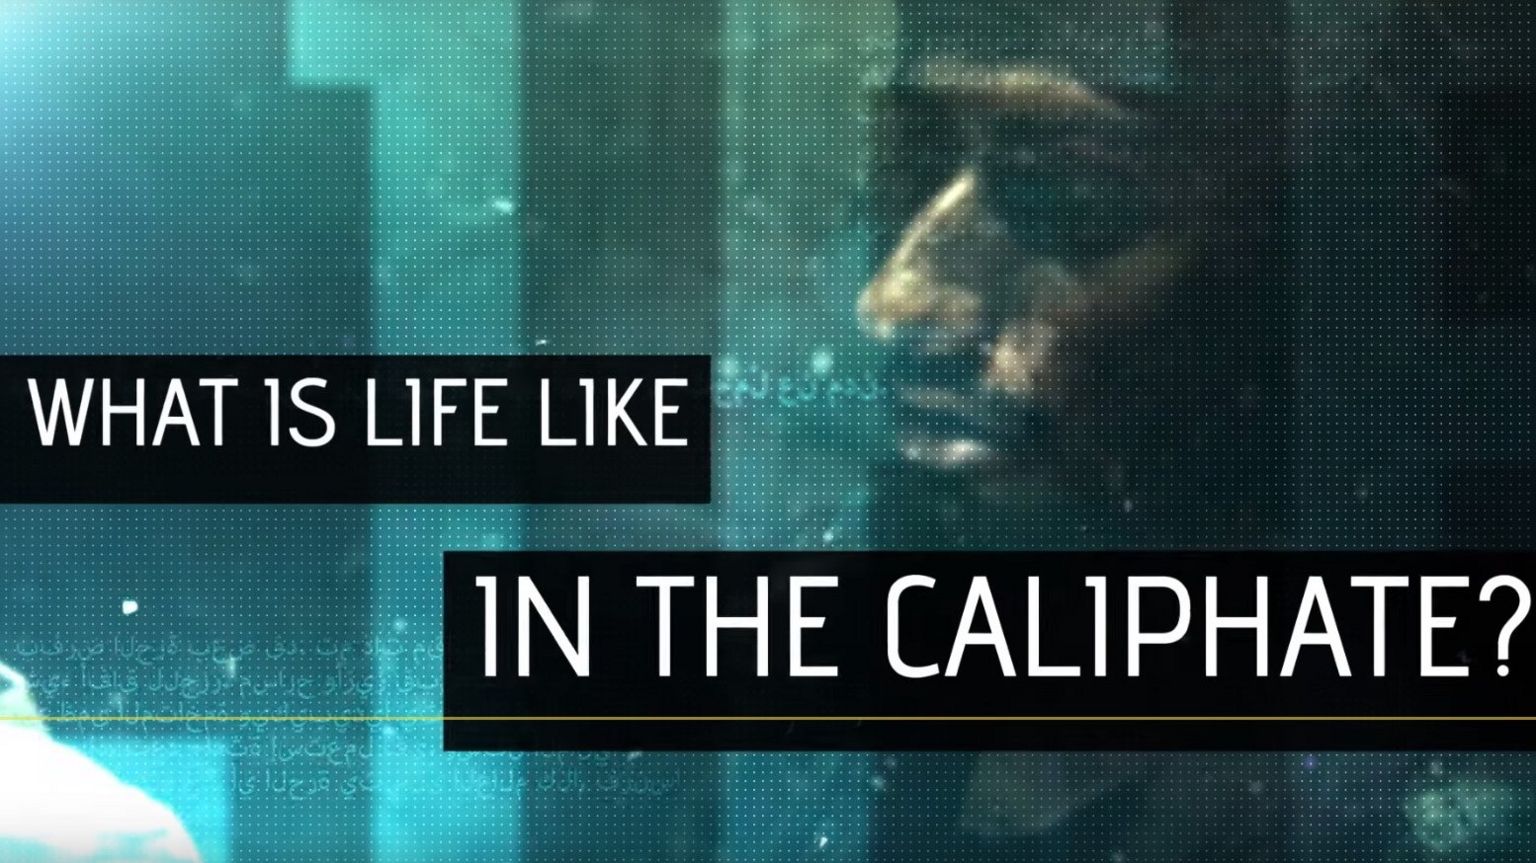 What is life like in the caliphate - graphic